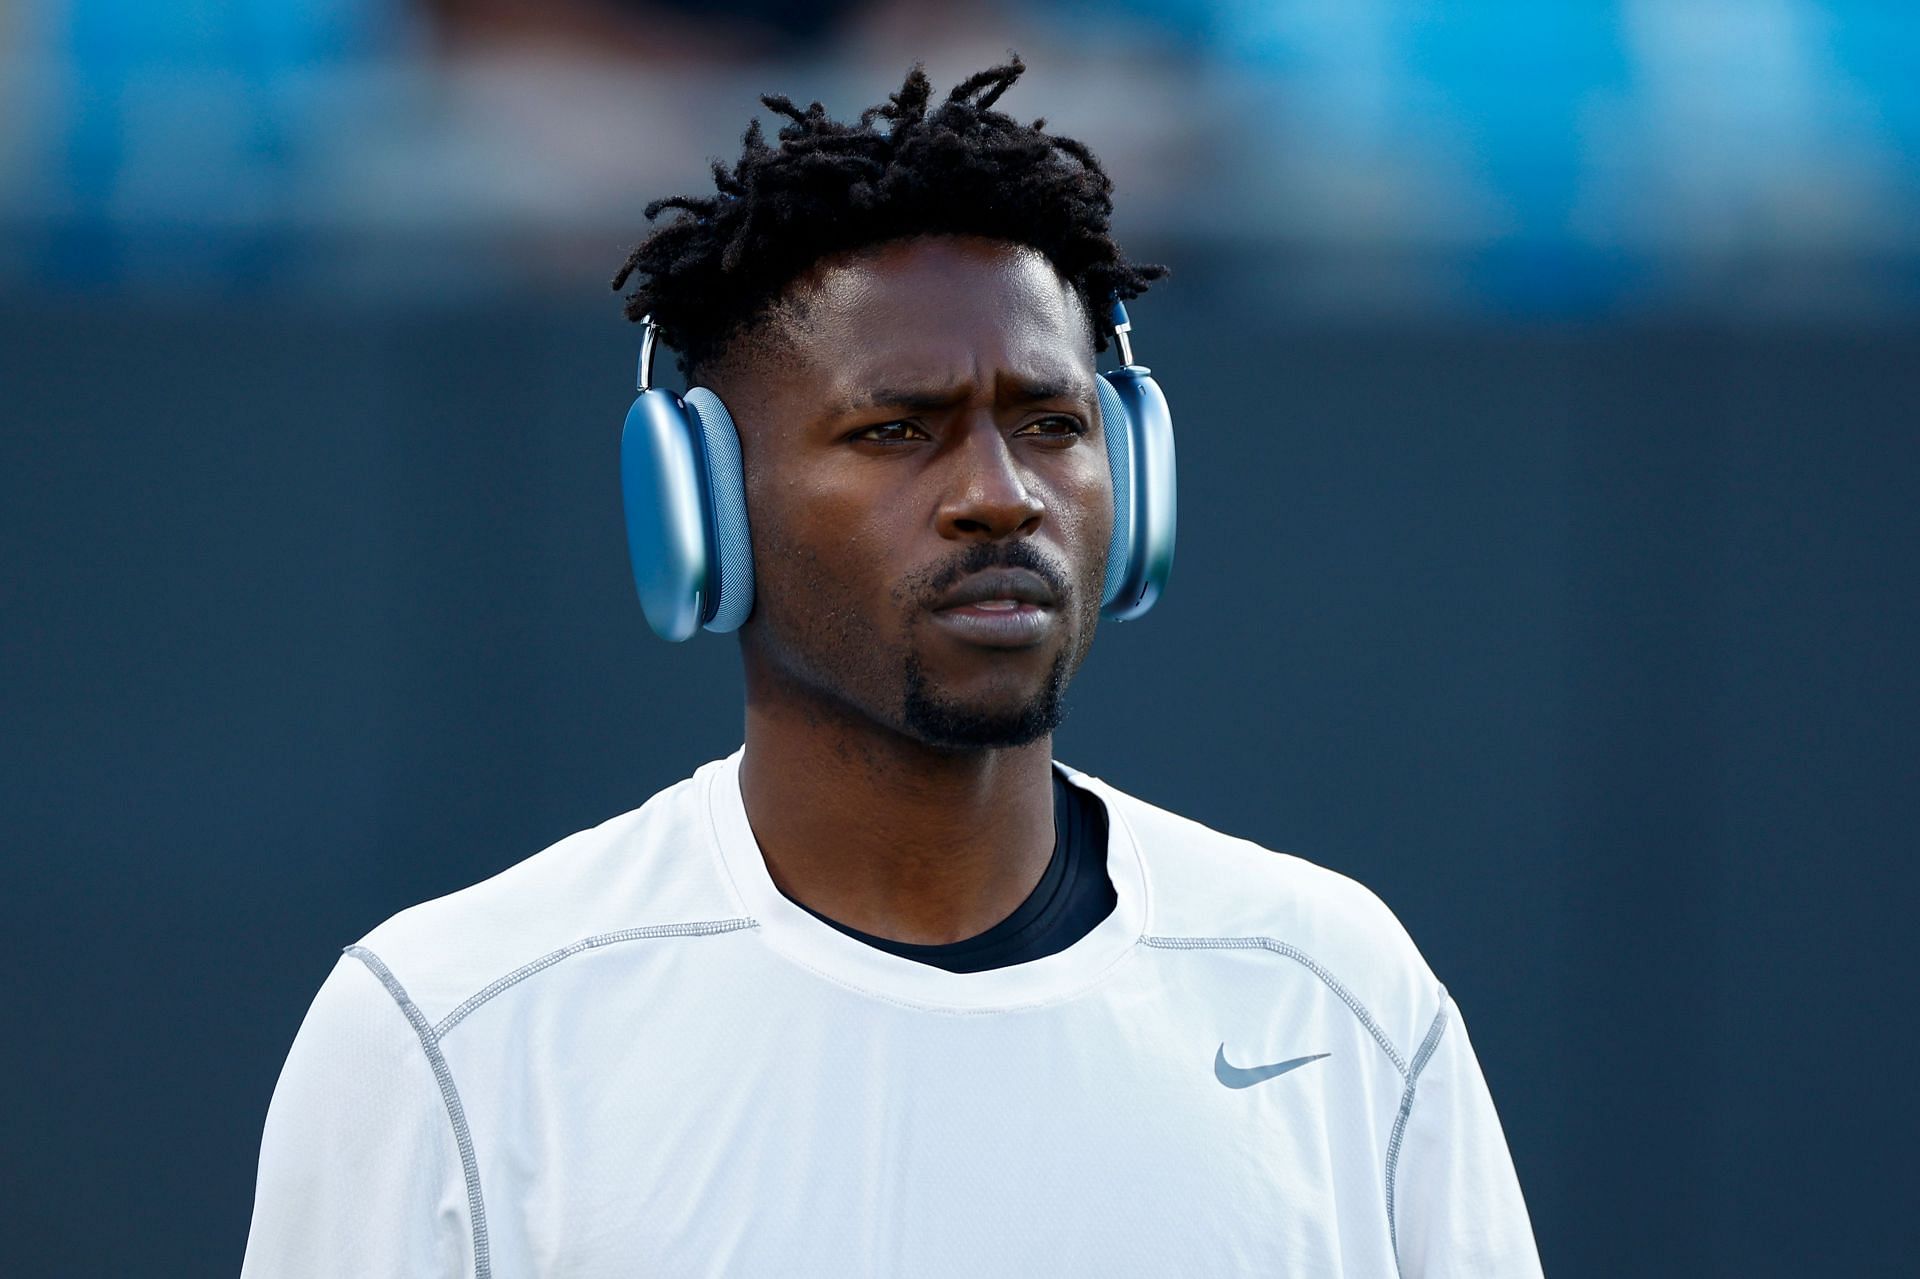 Antonio Brown is likely done in the NFL